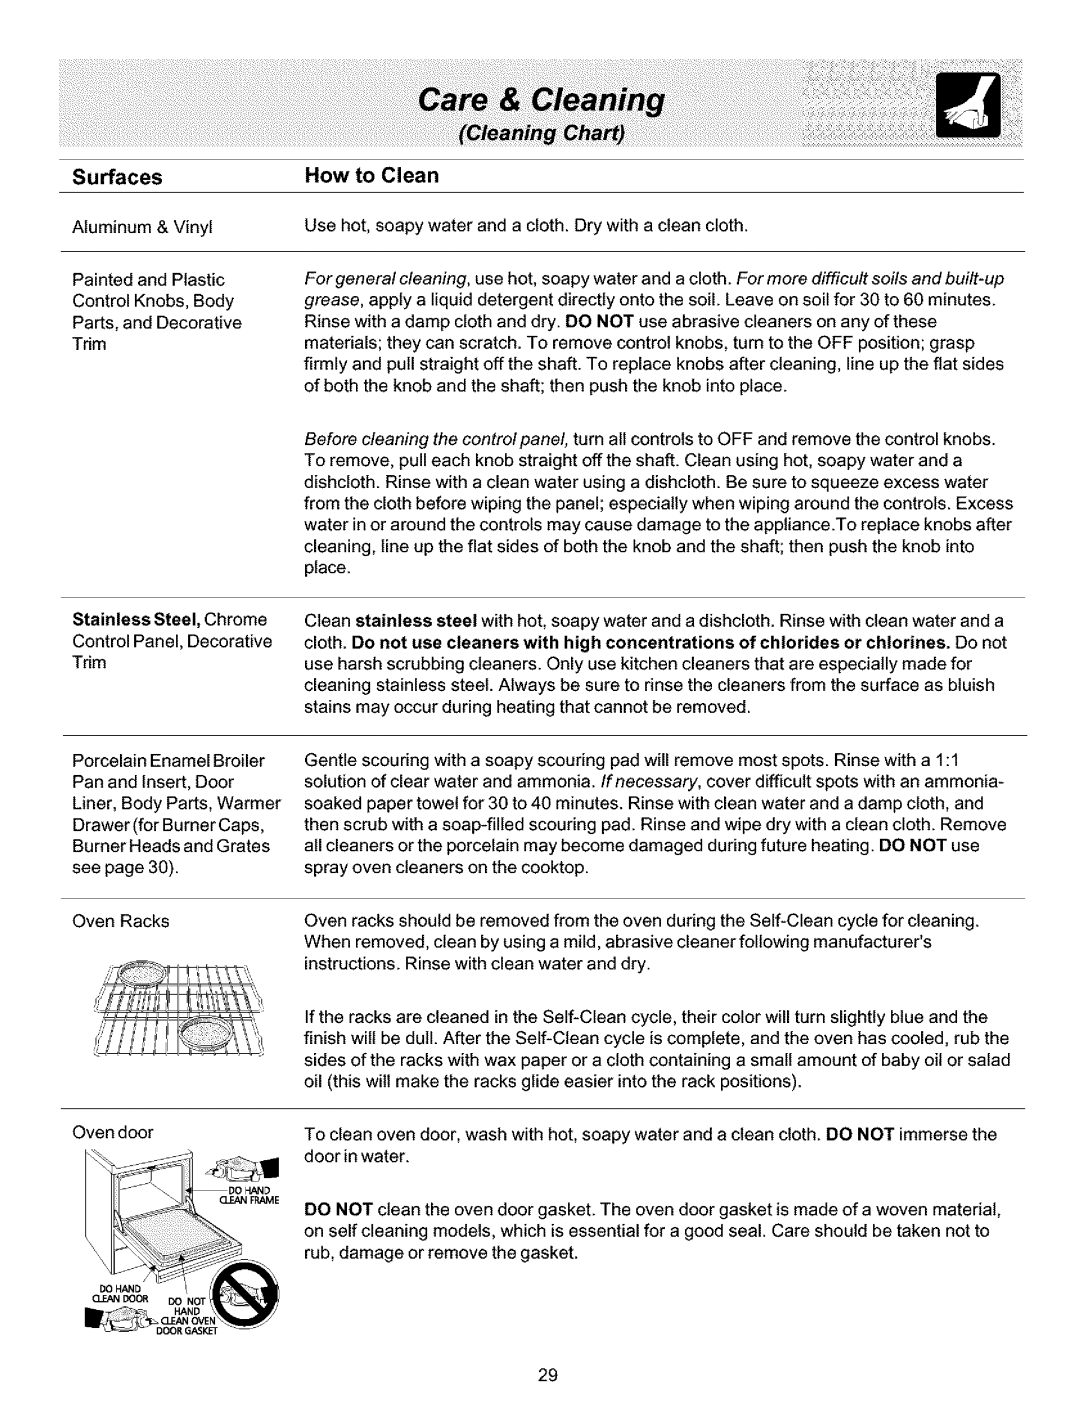 Frigidaire ES400 manual Surfaces, Stainless Steel, Chrome, How to Clean 